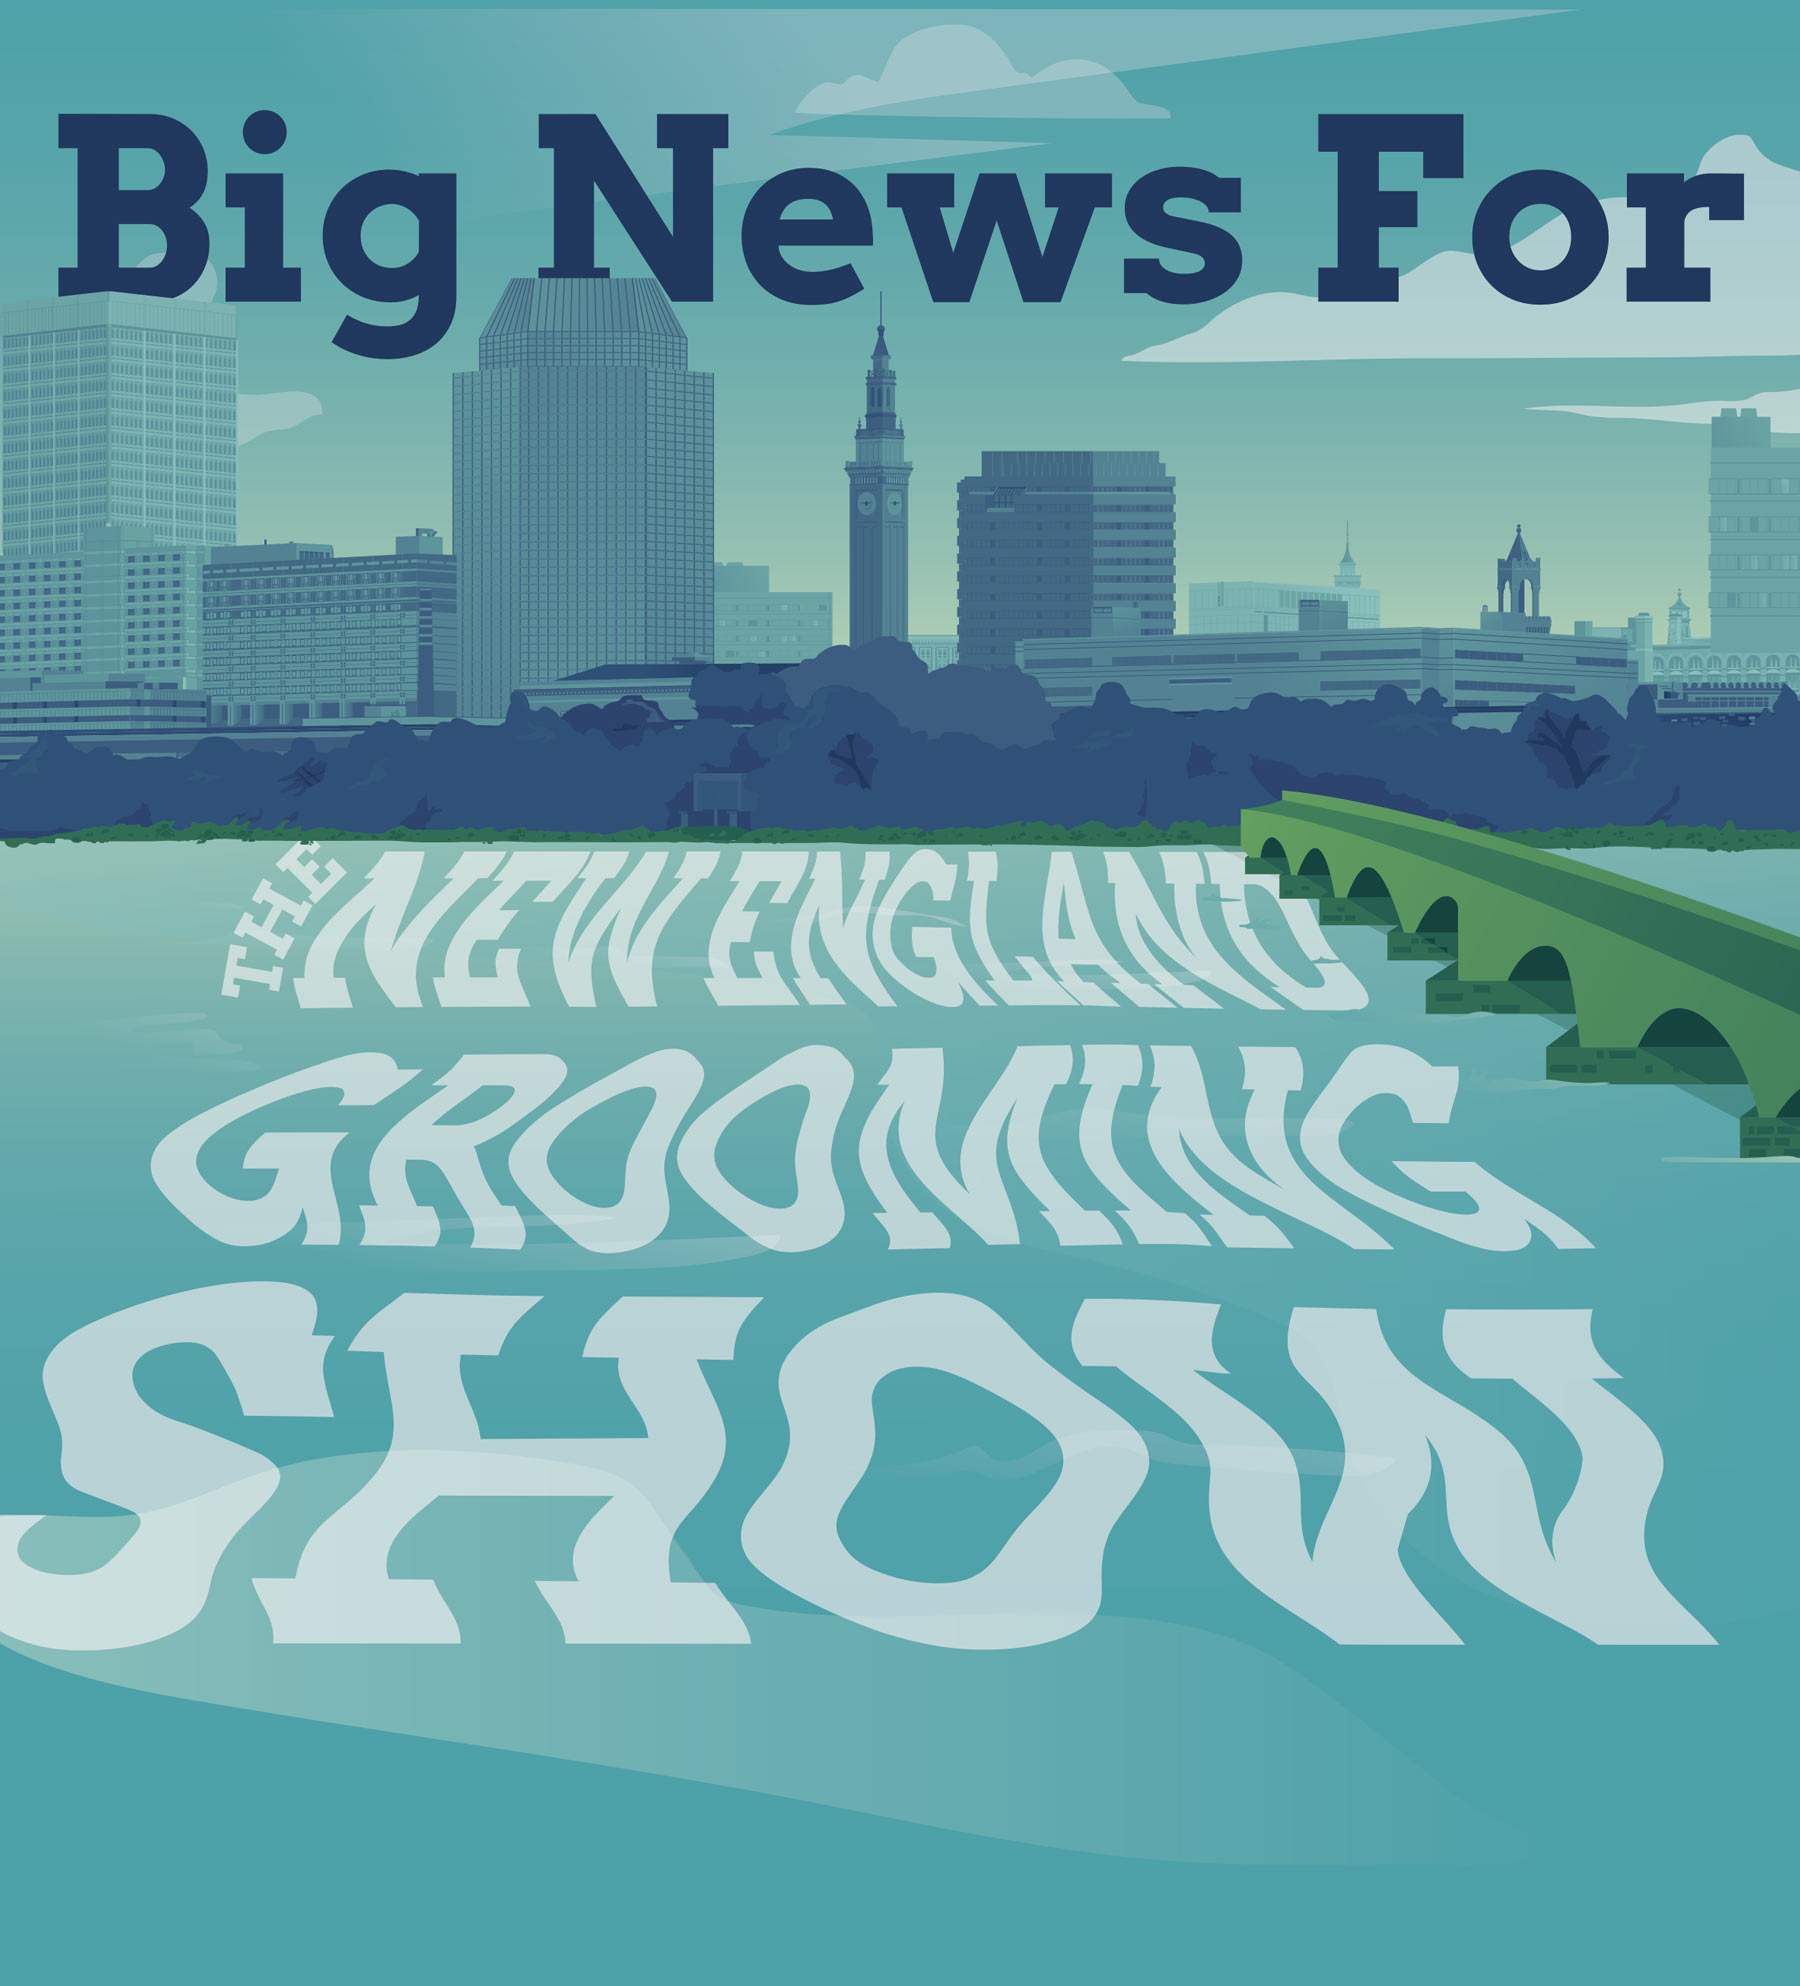 "Big News For the New England Grooming Show" and illustration of city across a river